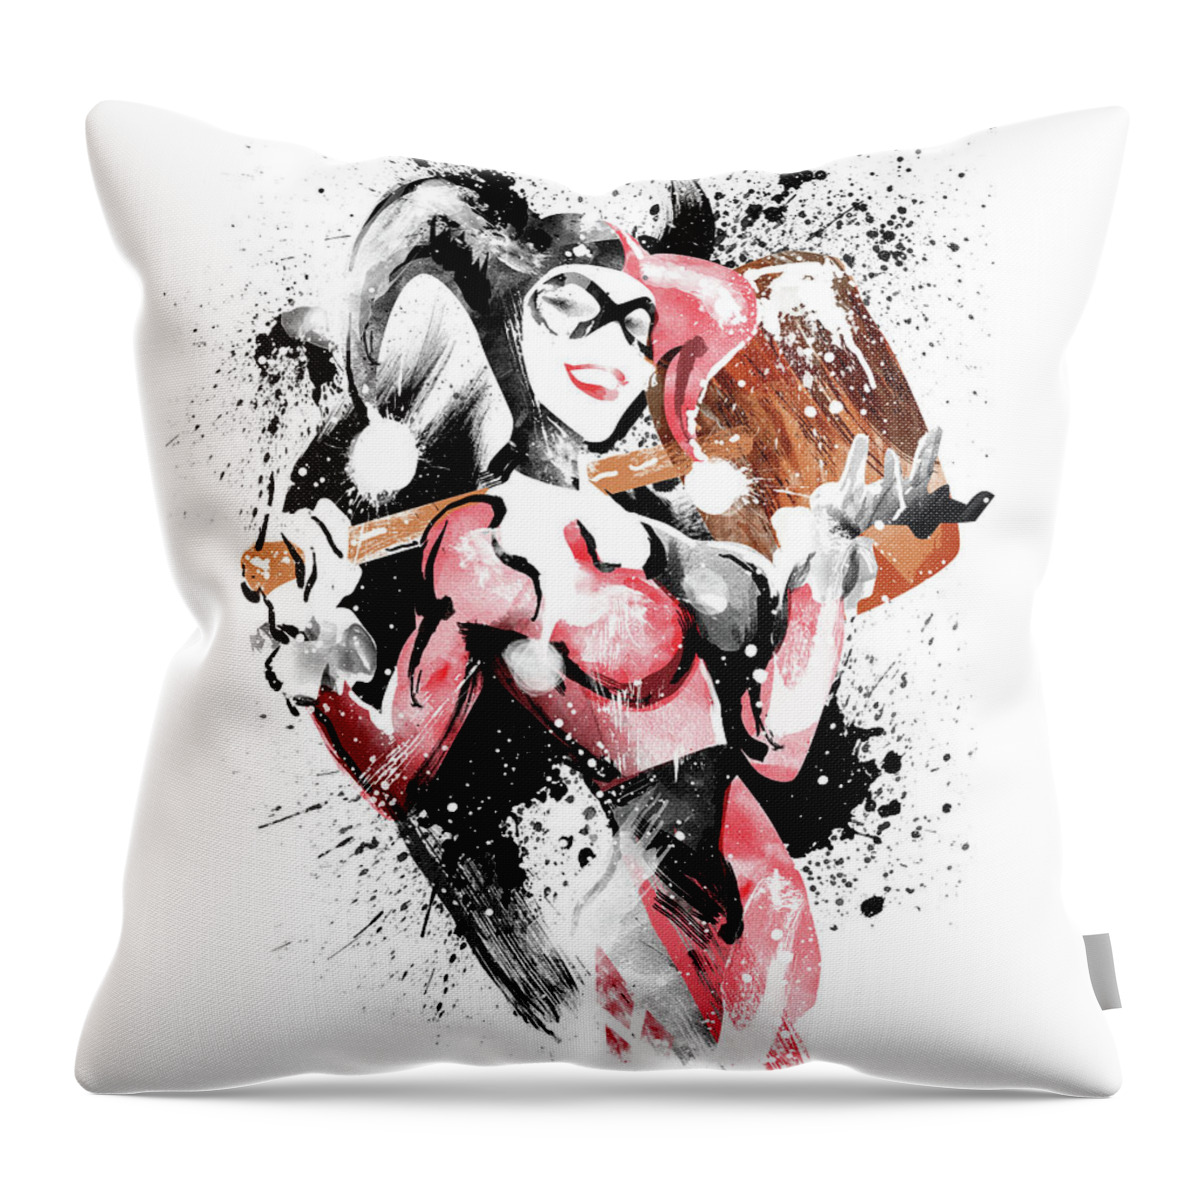 Harley Quinn Throw Pillow featuring the painting Harley Quinn by Unique Drawing